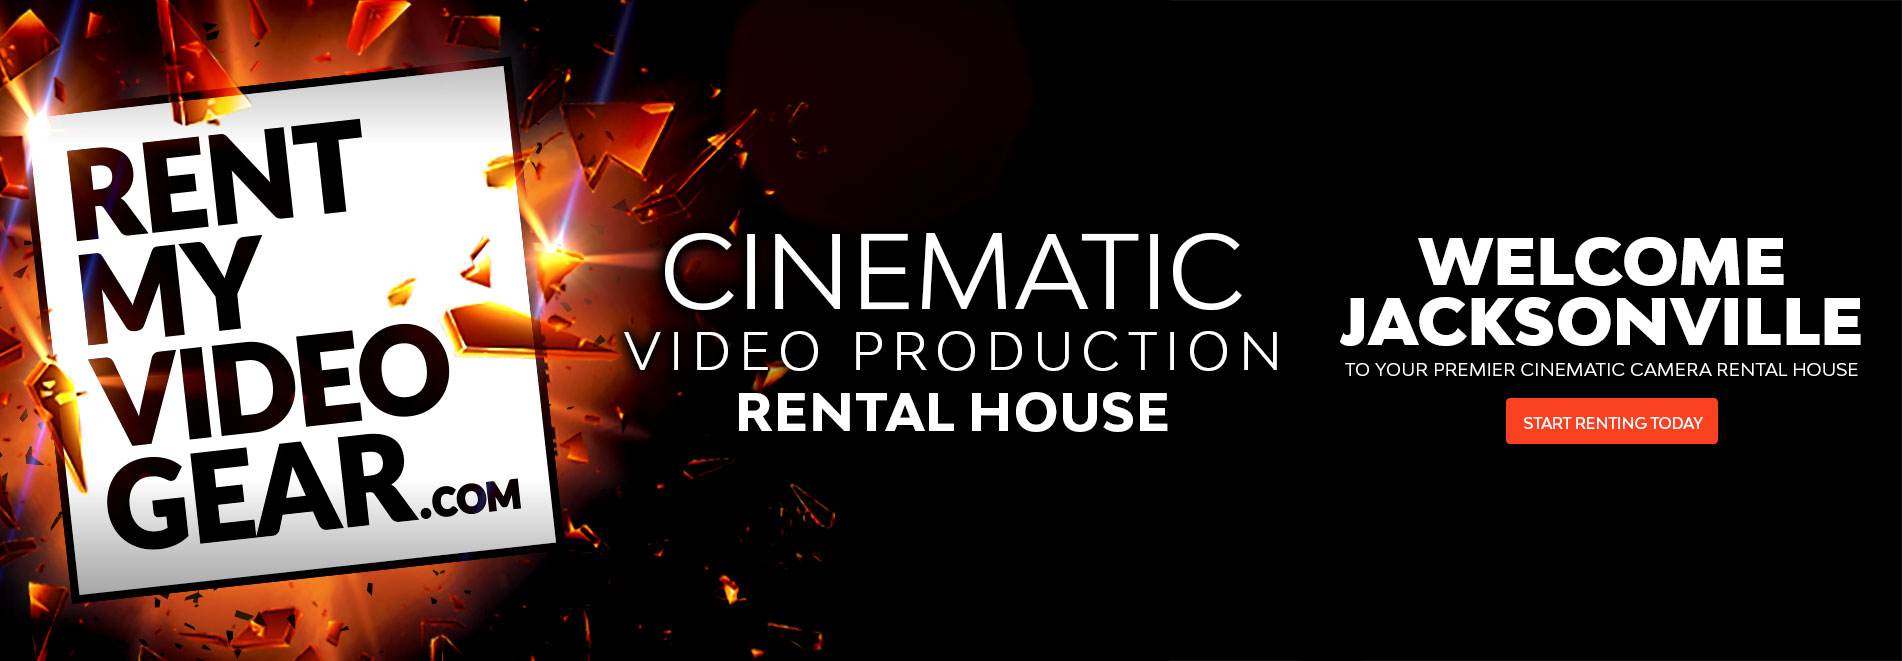 Cinematic Video Production Rental House Welcome Jacksonville to your premier cinematic camera rental house